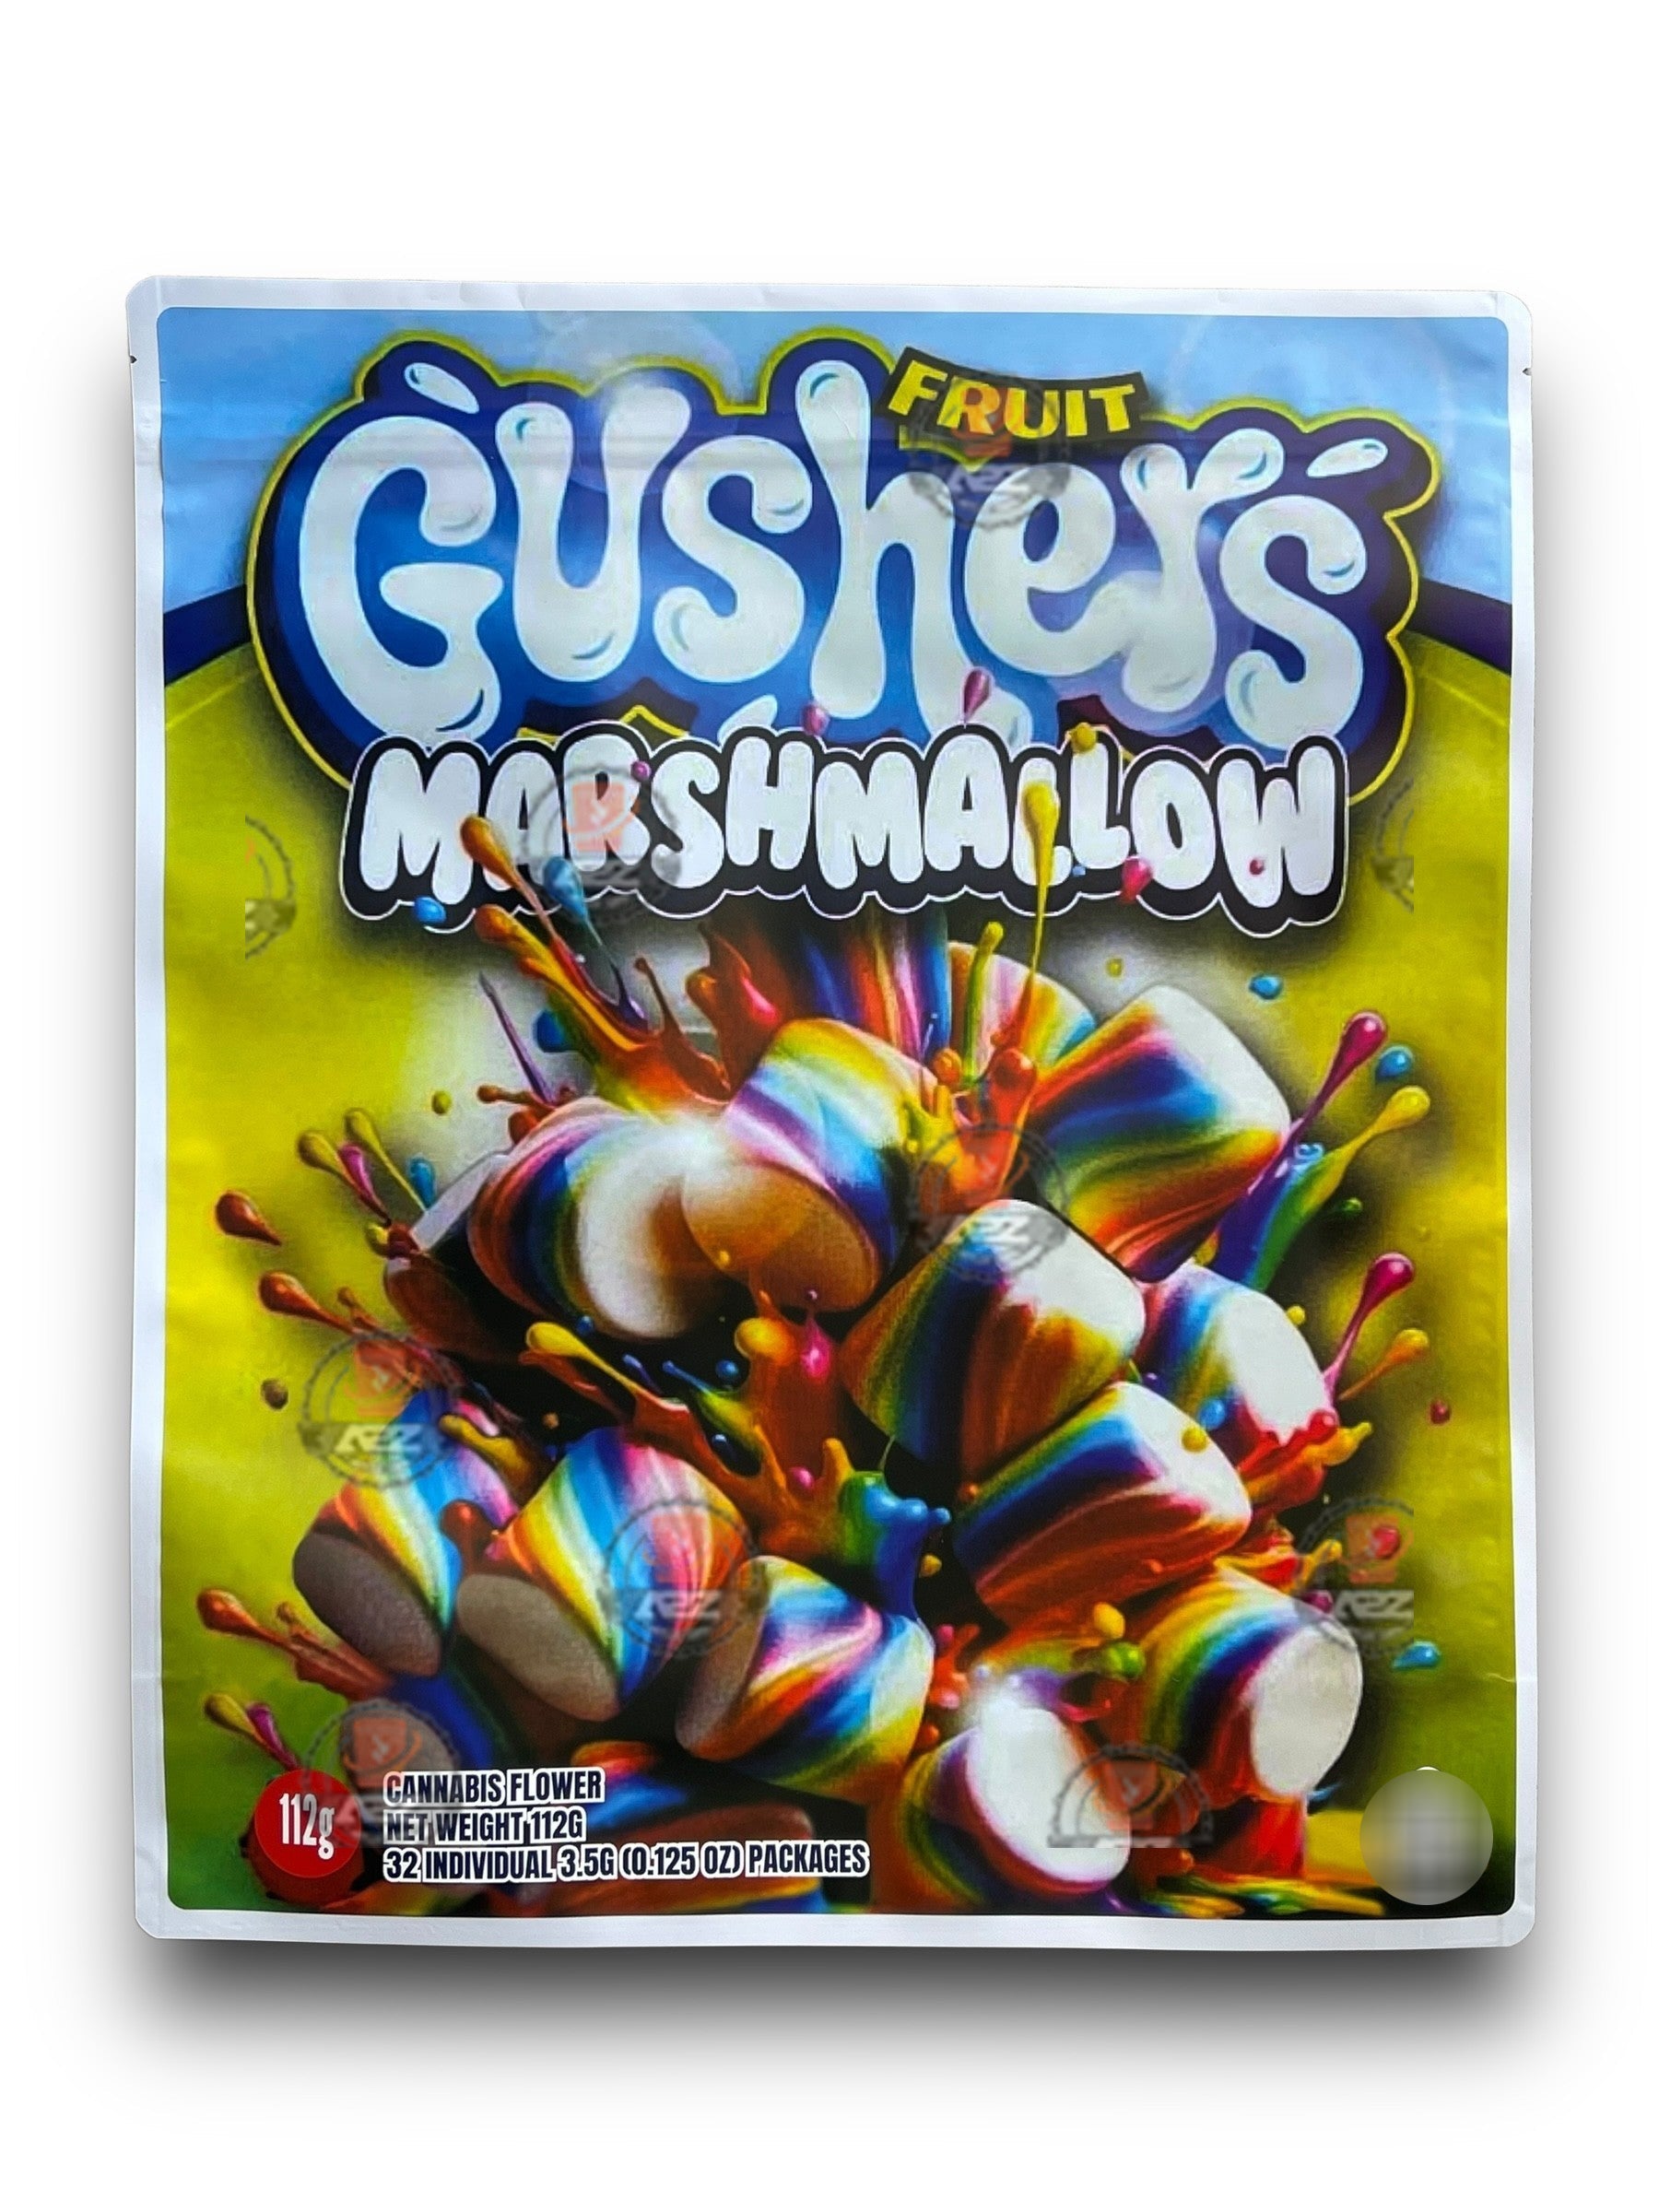 Fruit Gushers Marshmallow 1 Pound Mylar Bag Net Weight 112G Packaging Only